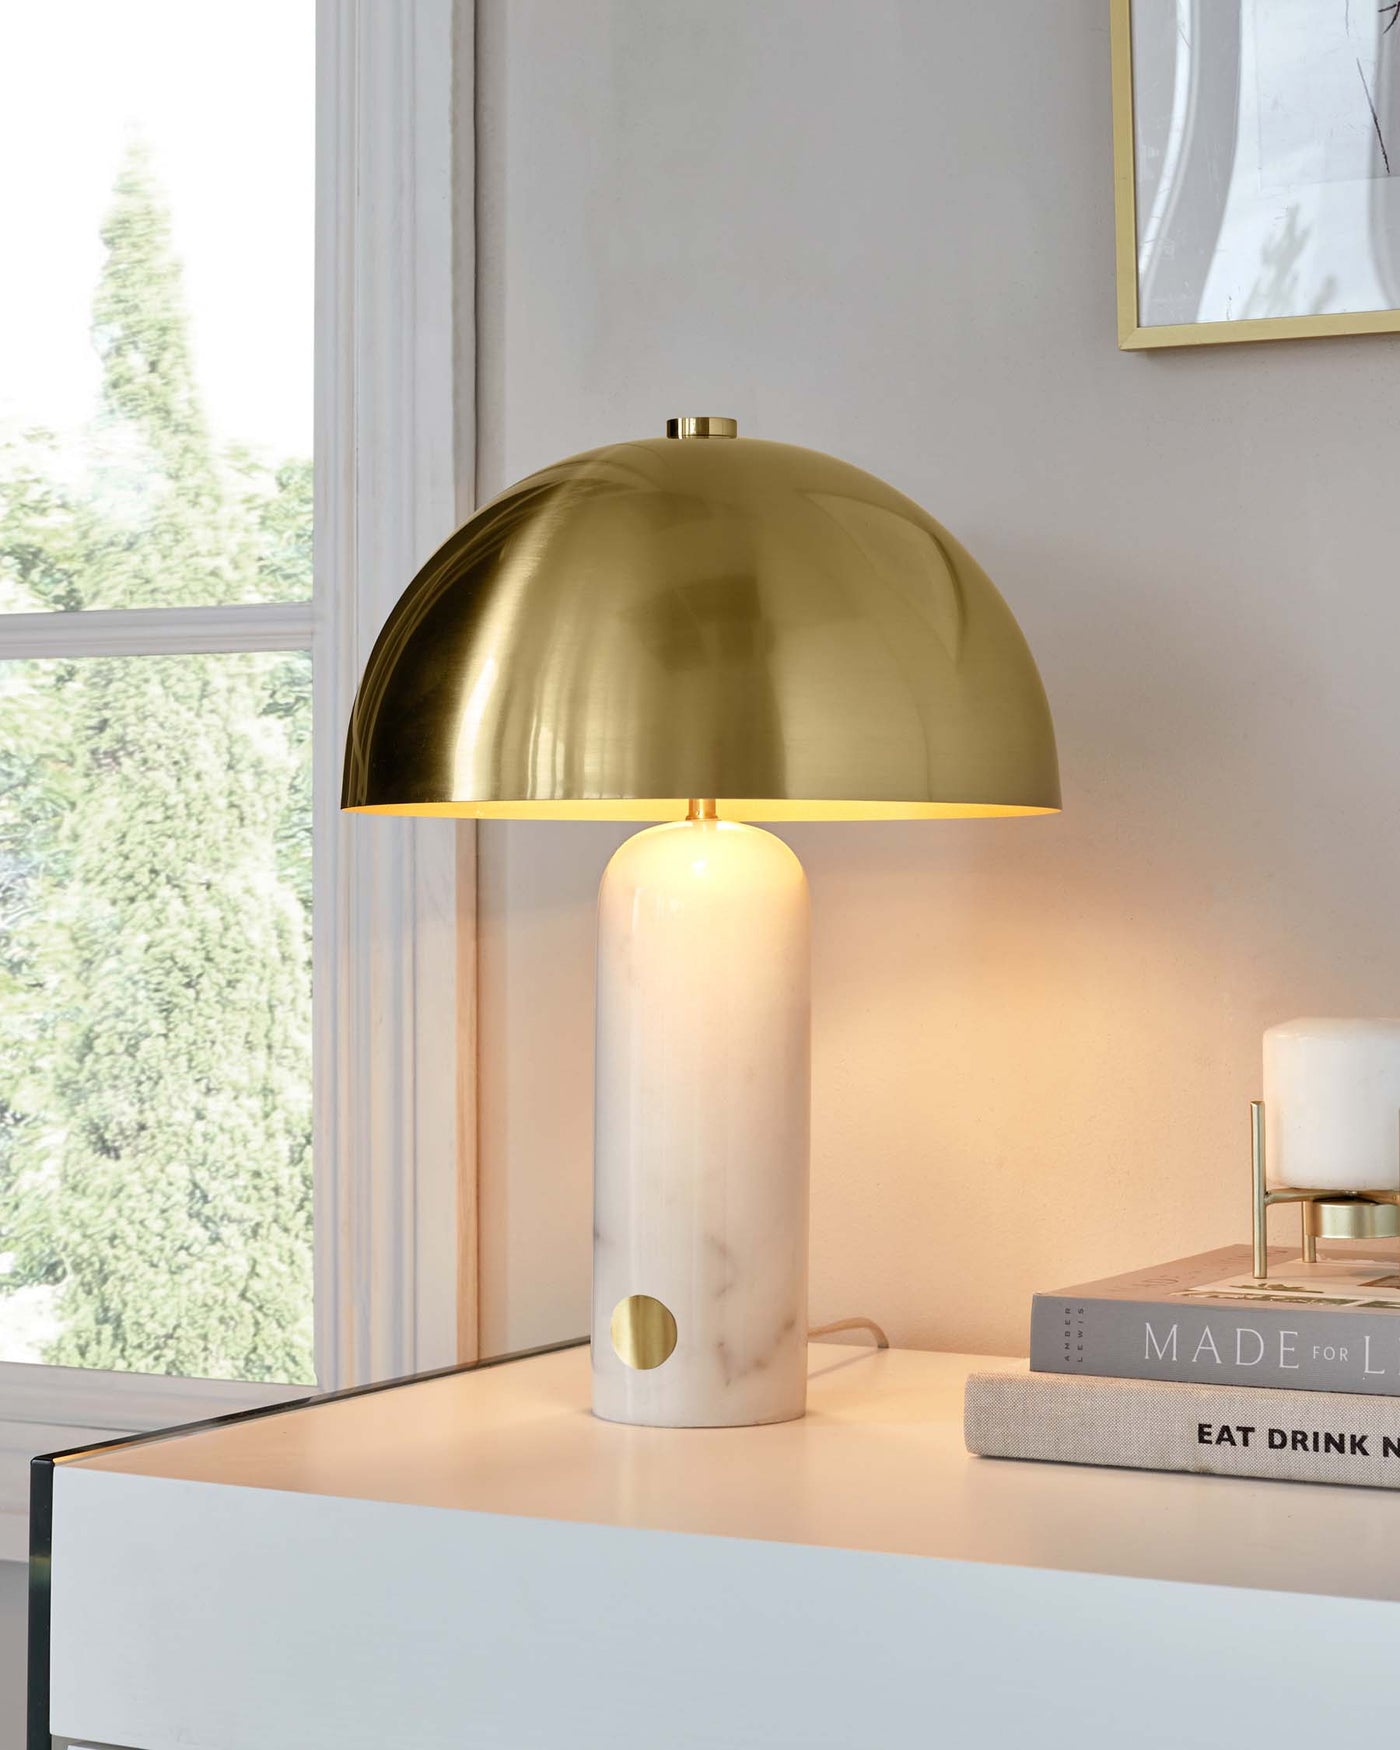 Elegant marble table lamp with a brass dome shade on a white modern tabletop, next to decor books.